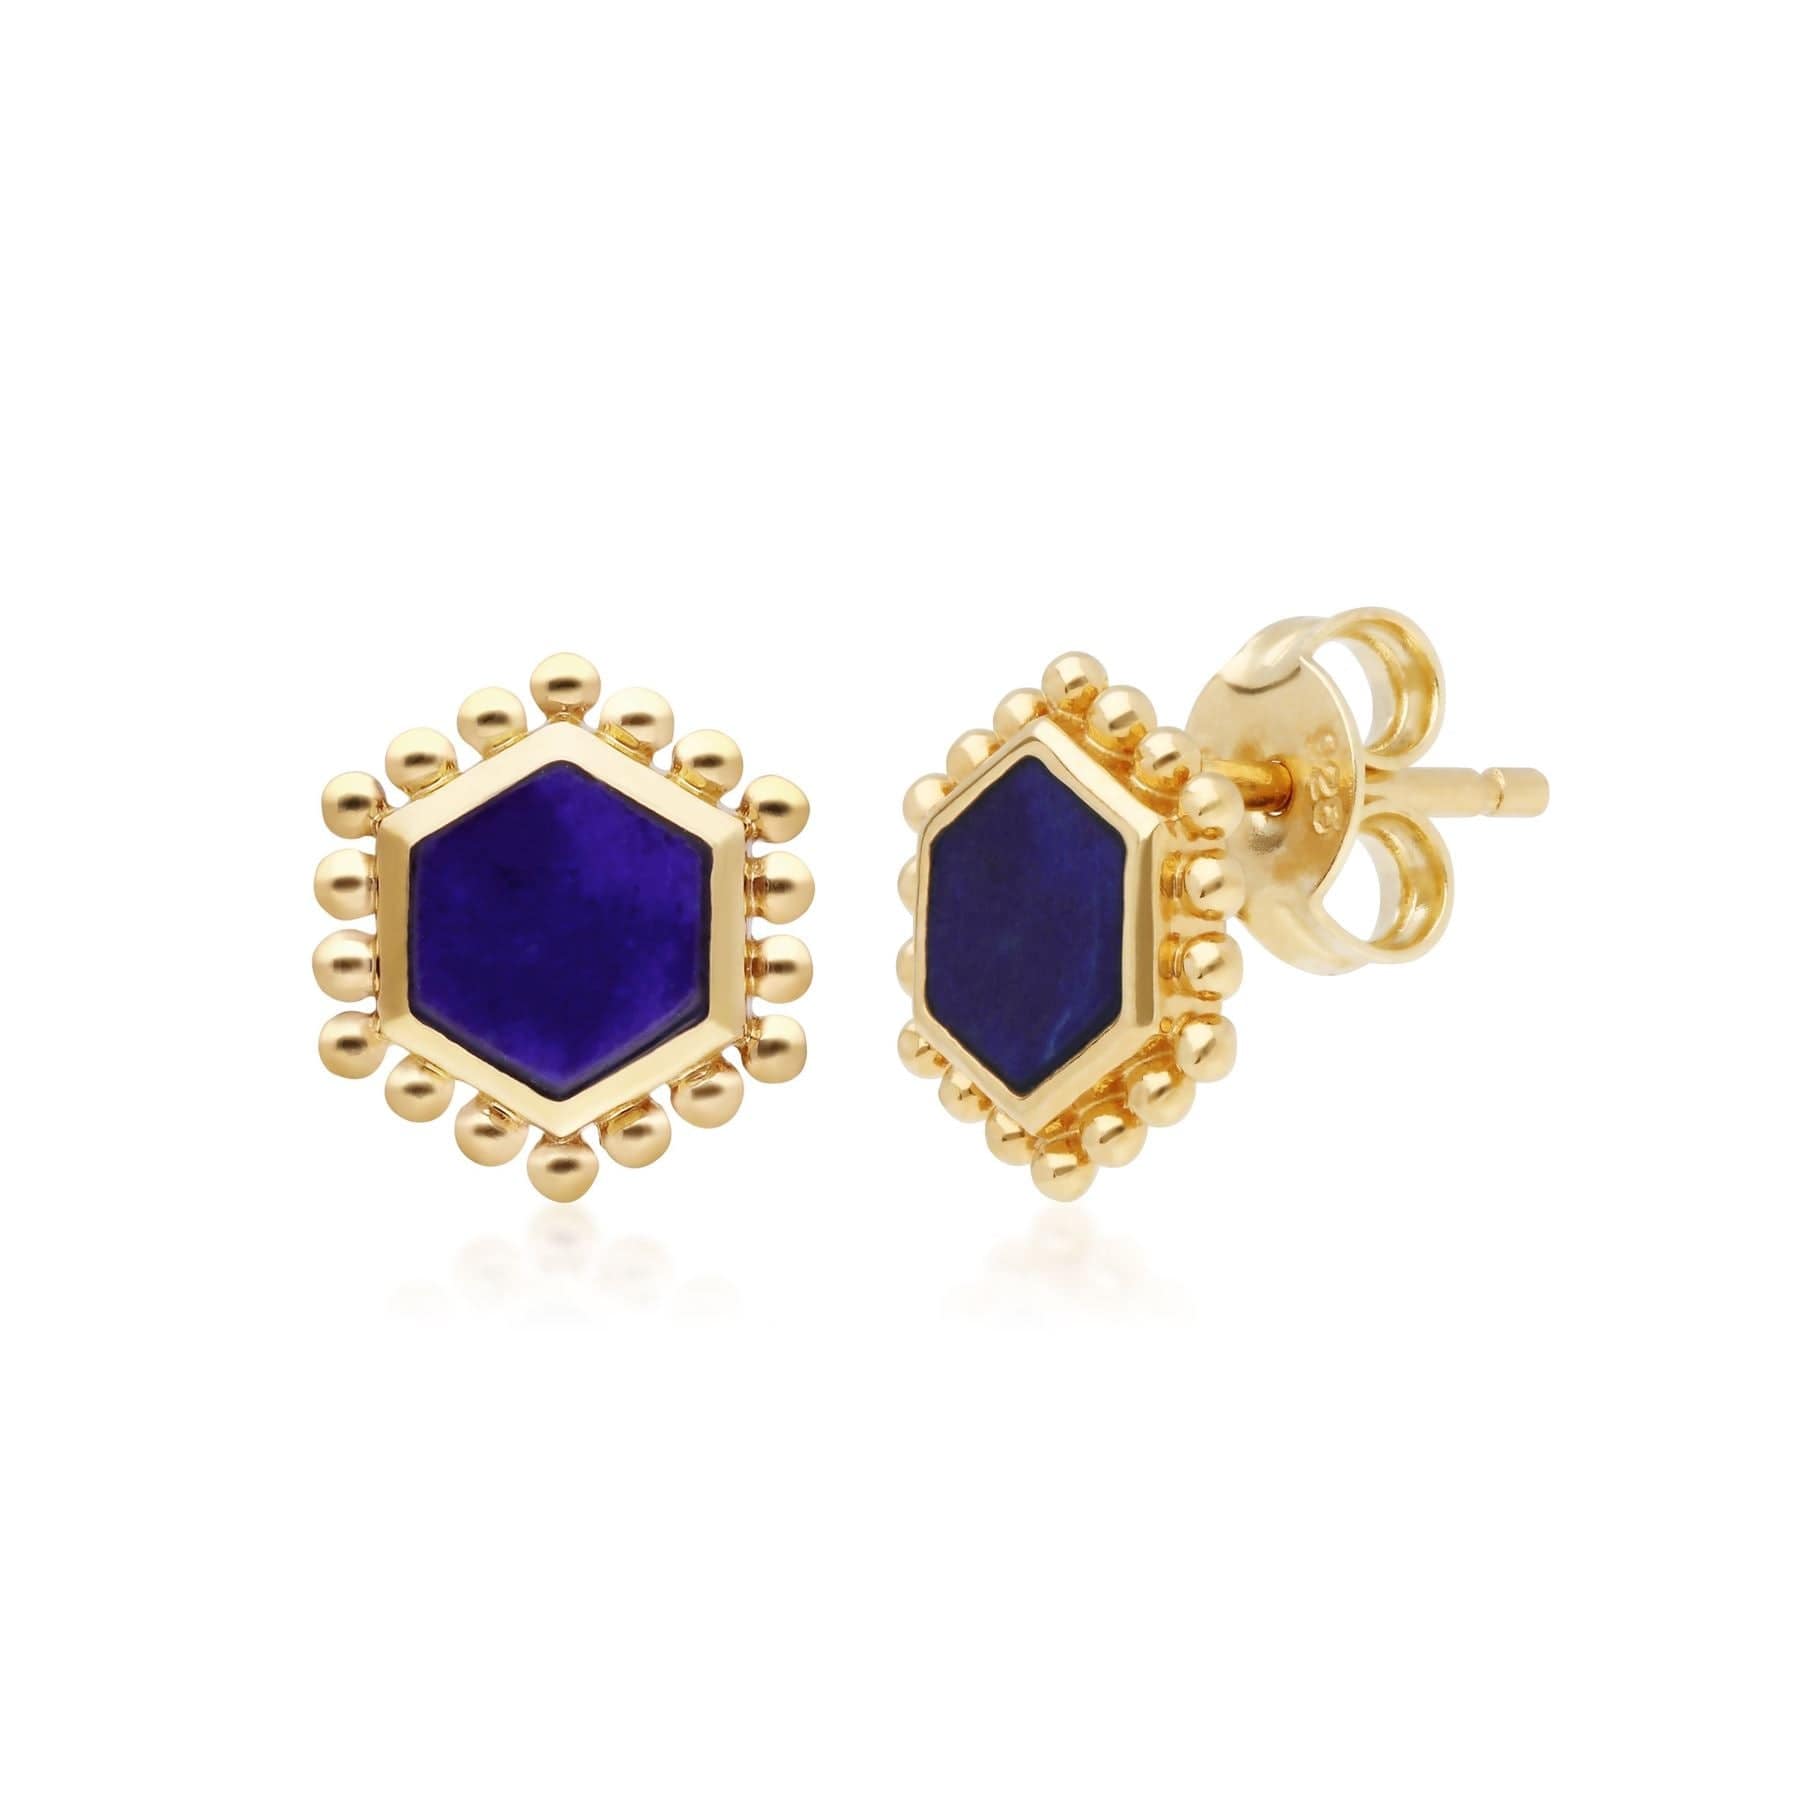 Lapis Lazuli Slice Stud Earrings in Yellow Gold Plated Sterling Silver